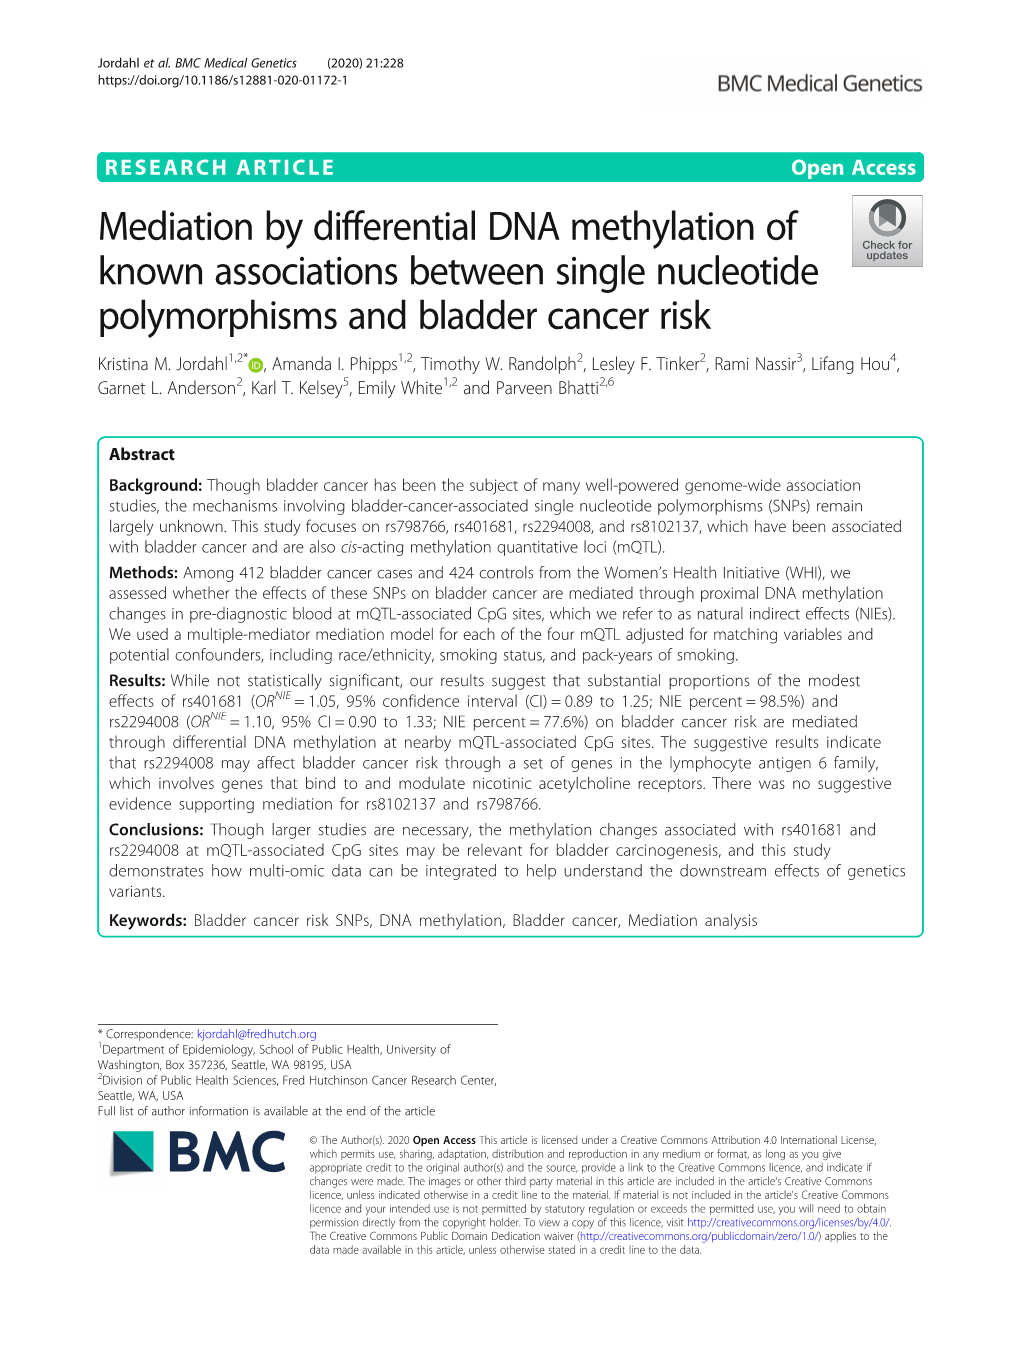 Mediation by Differential DNA Methylation of Known Associations Between Single Nucleotide Polymorphisms and Bladder Cancer Risk Kristina M